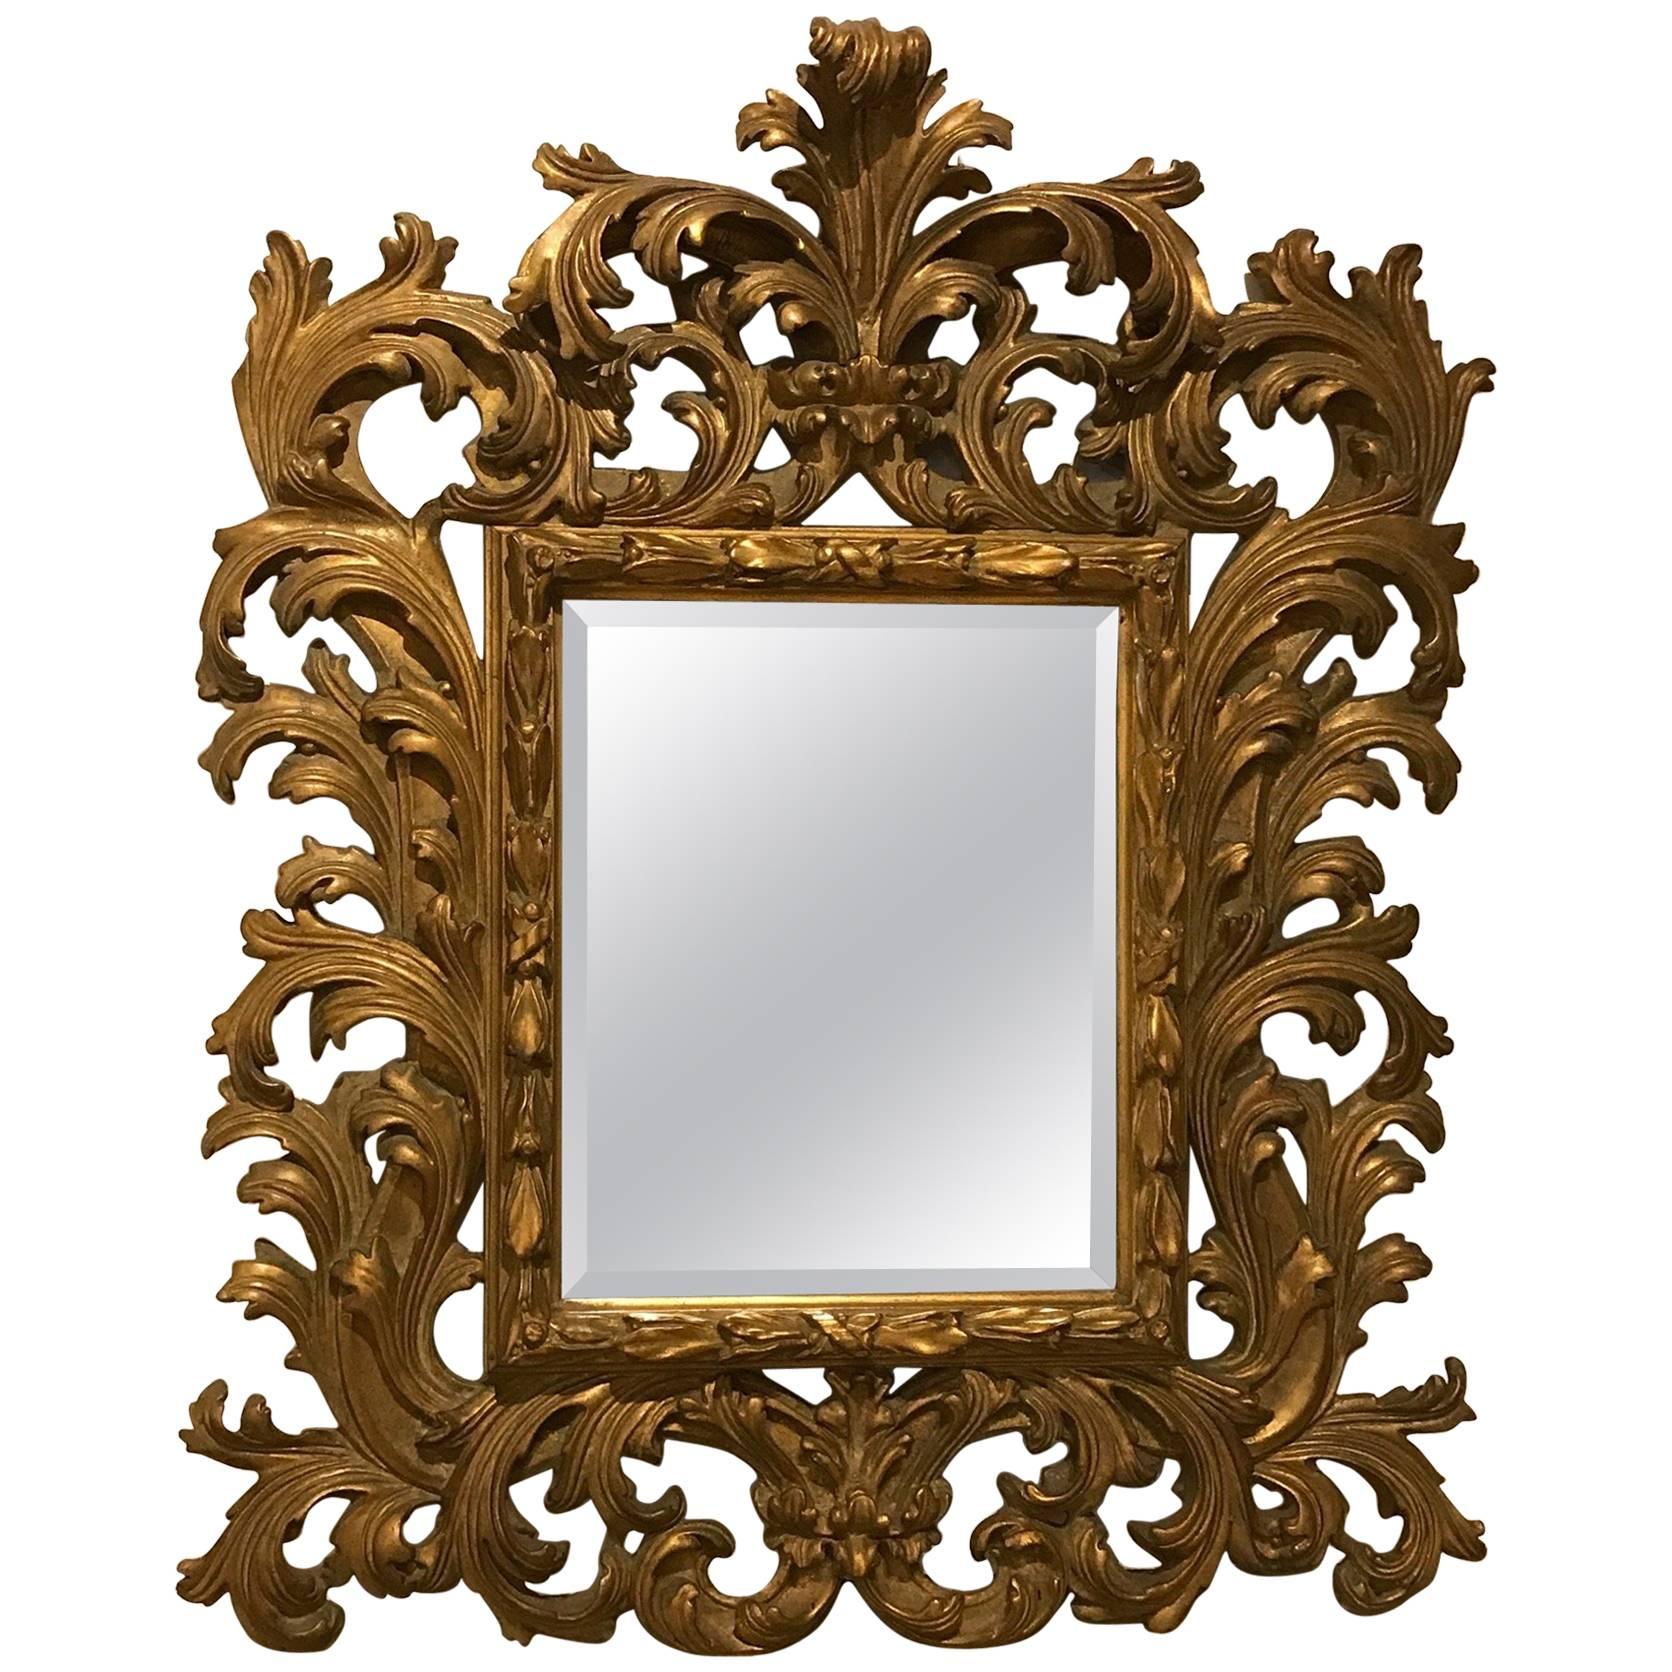 Ornate Venetian Style Carved Giltwood Mirror